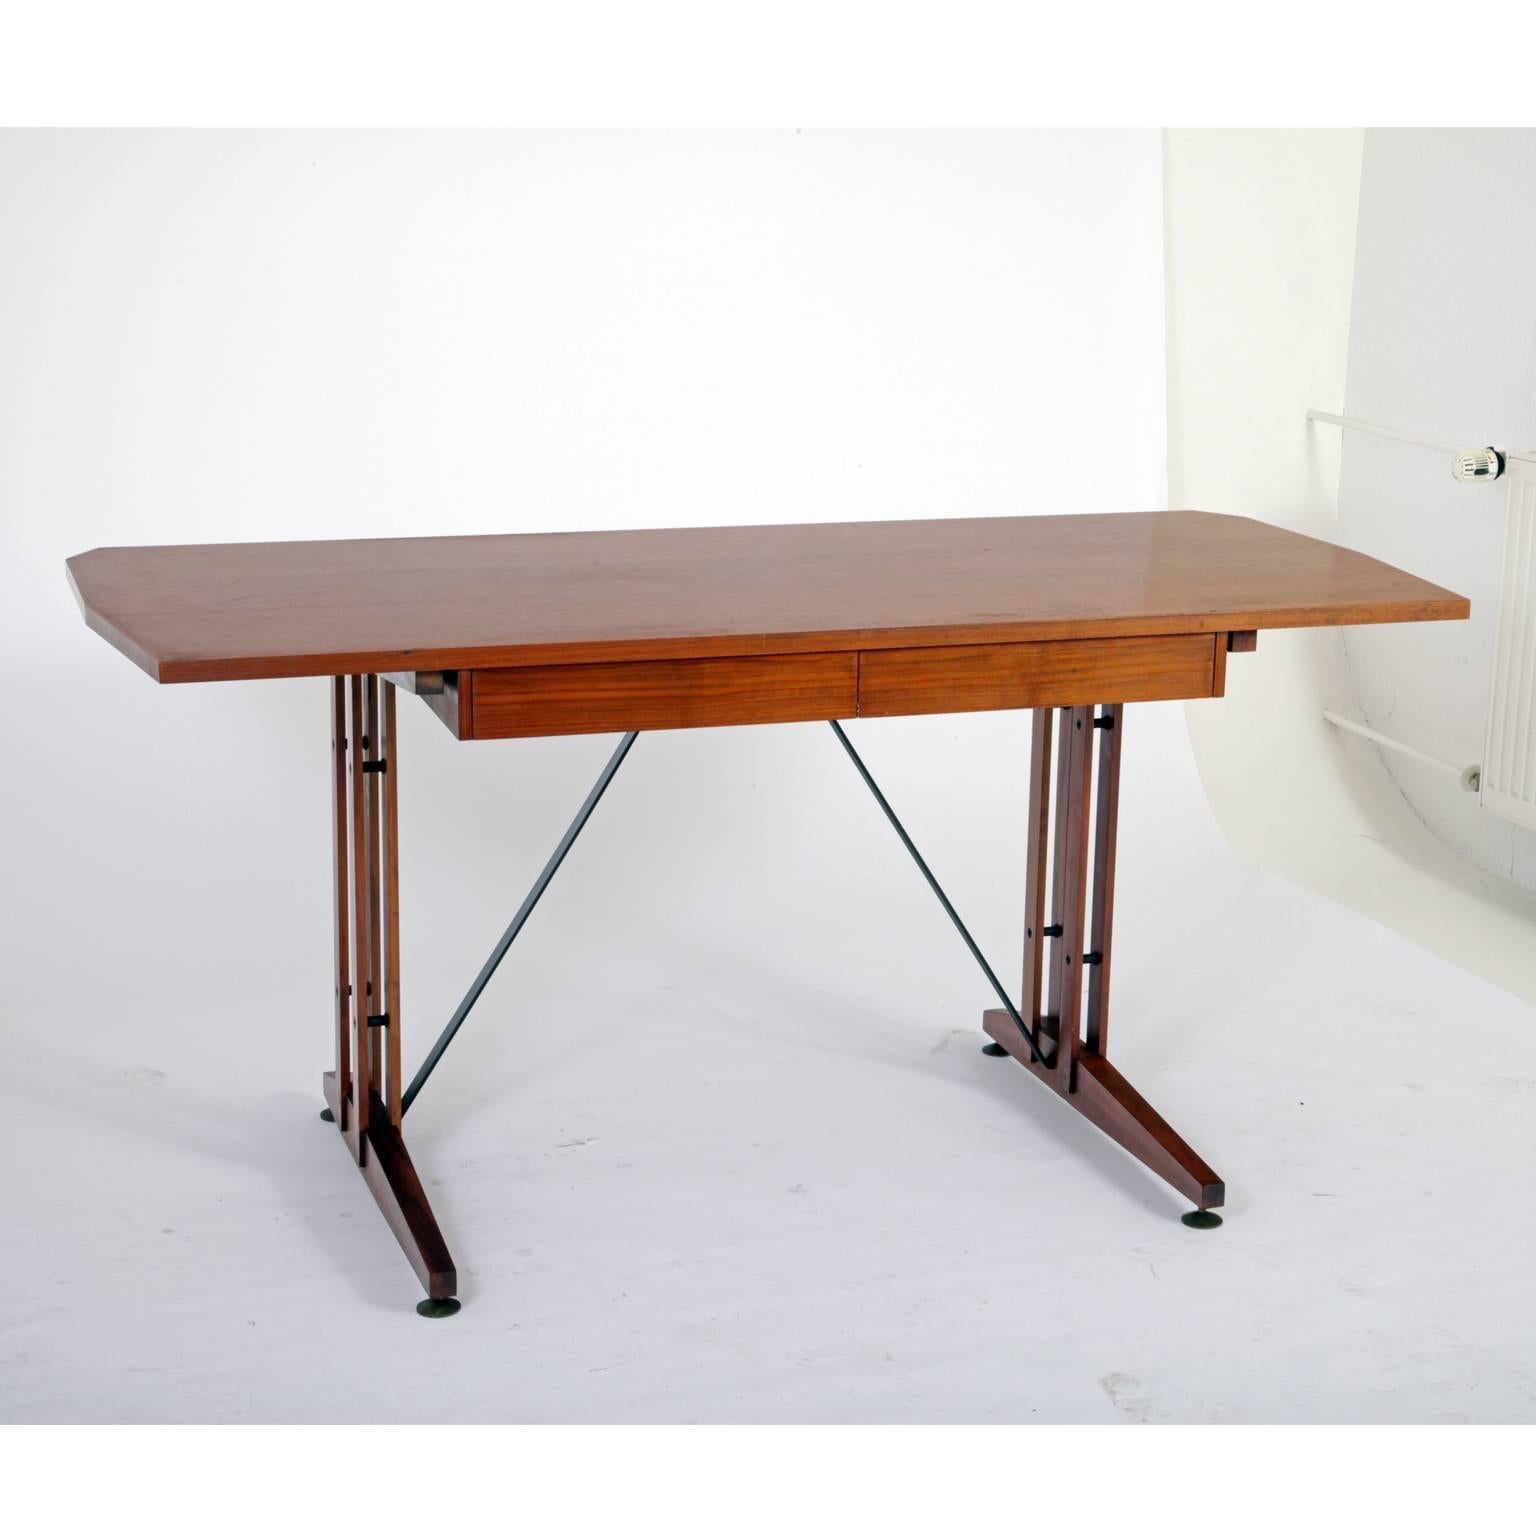 Large Mid-Century desk with two drawers. The tabletop is angular on the smaller sides. The legs stand on round brass feet and are supported by ironstruts.